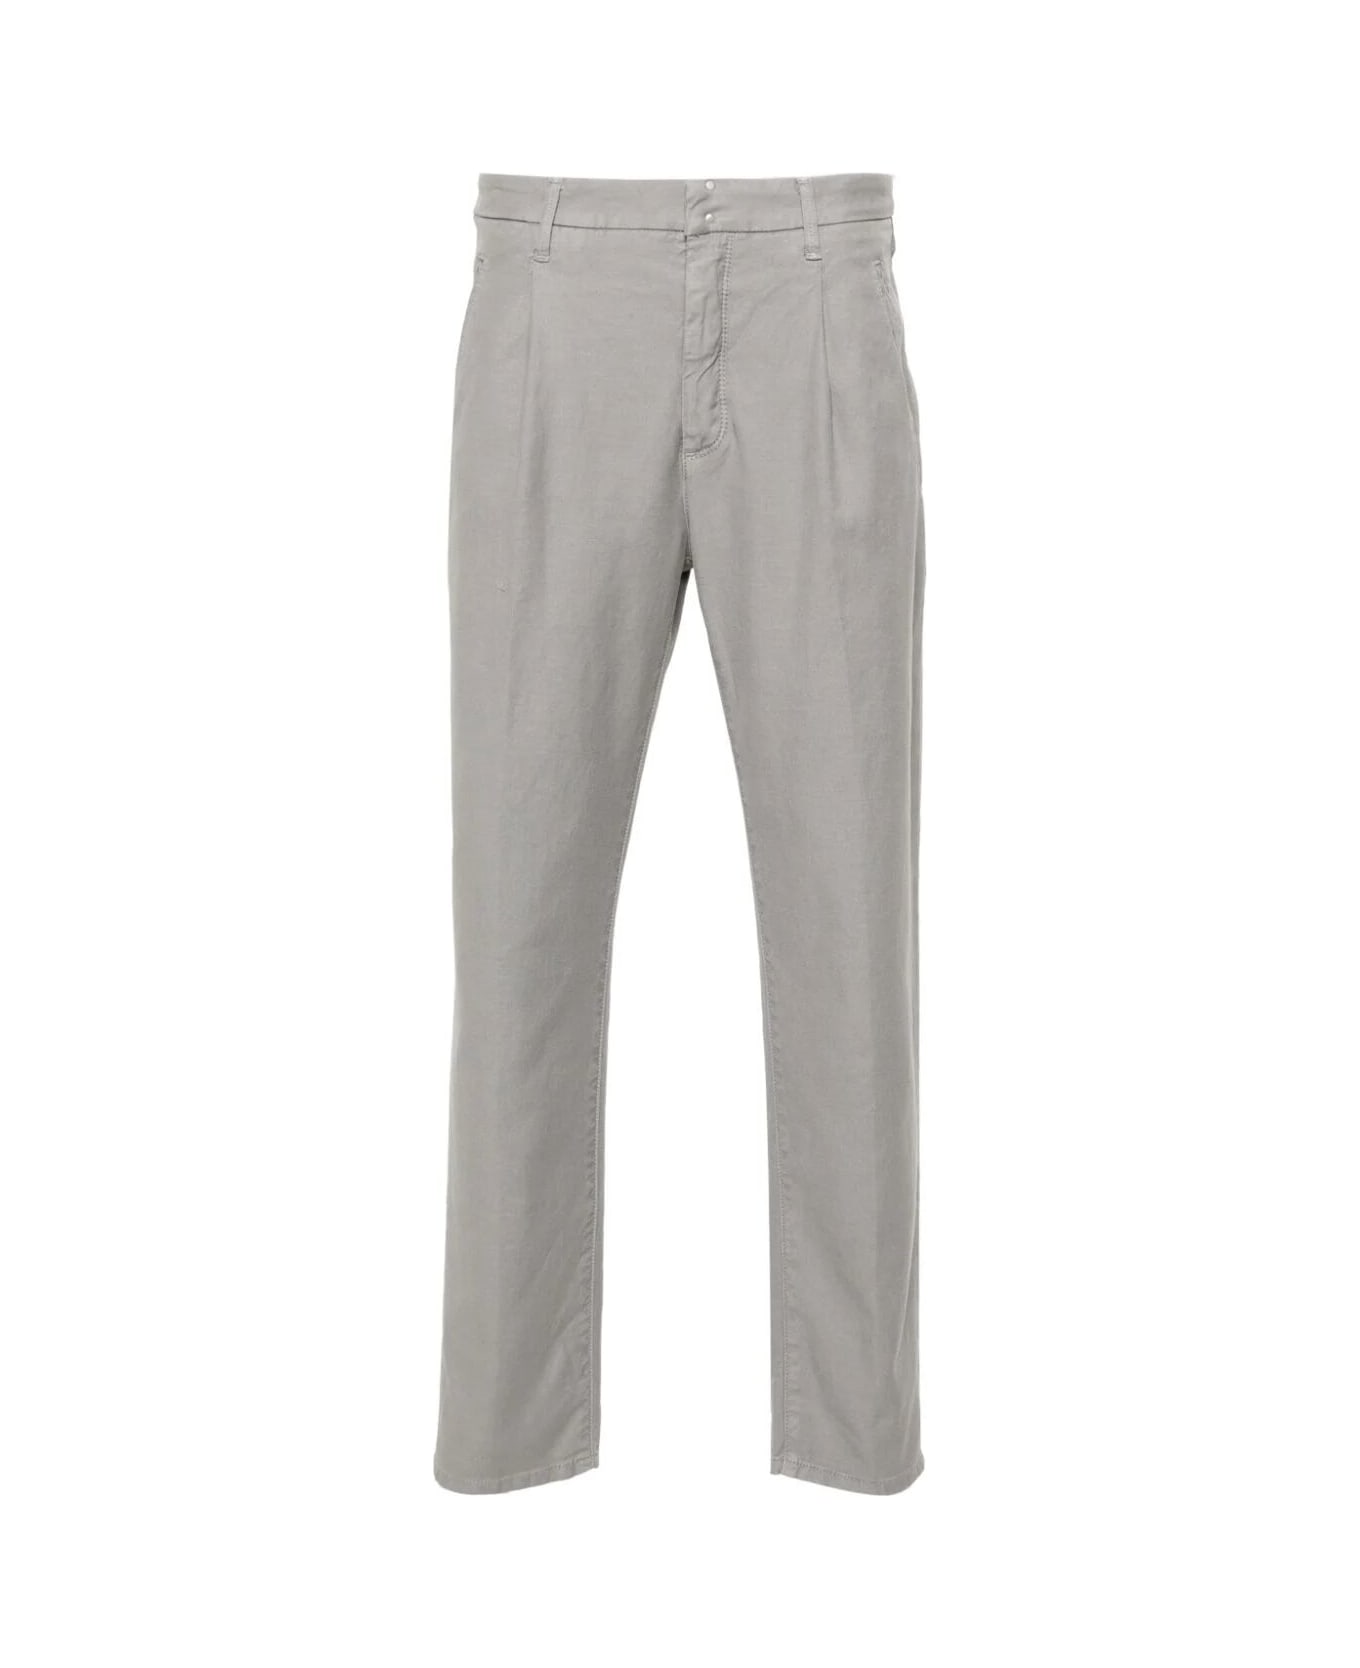 Incotex Special Straight Trouser - Cement Grey ボトムス